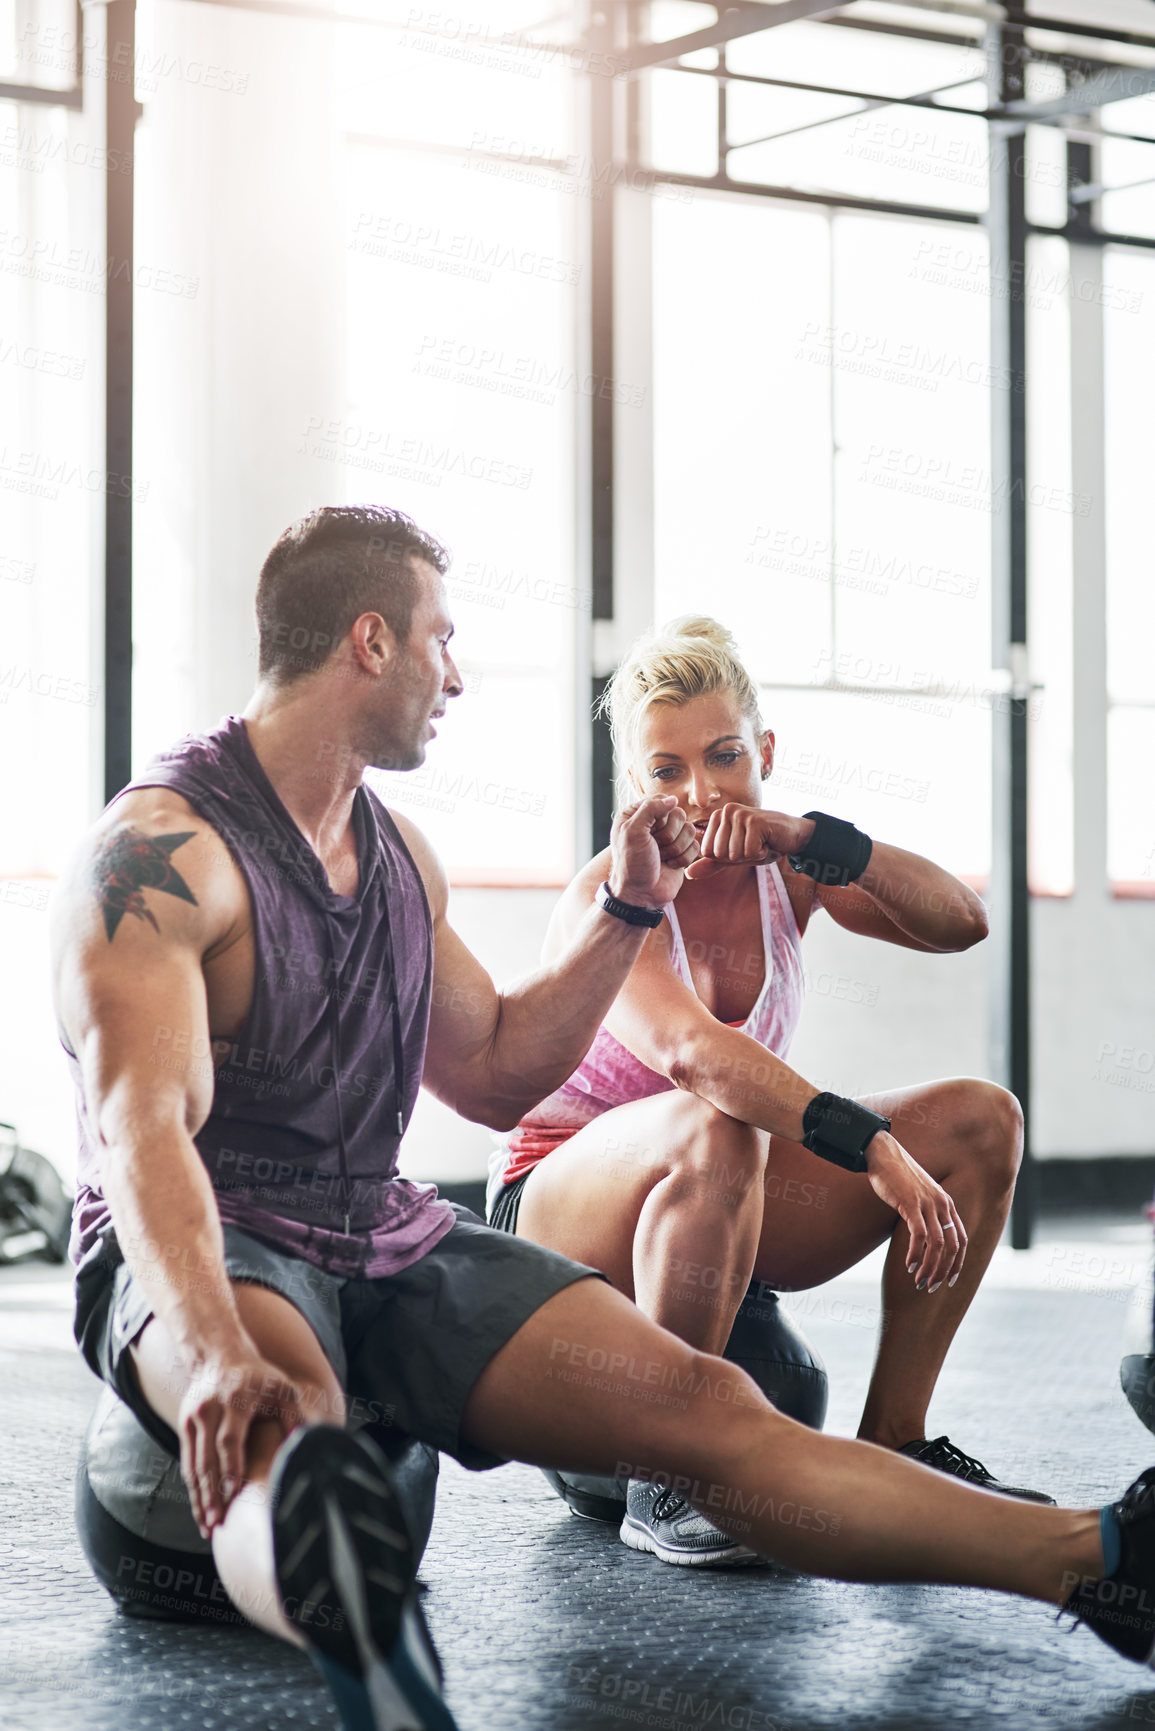 Buy stock photo Shot of a man and a woman giving each other a fist pump after a workout at the gym